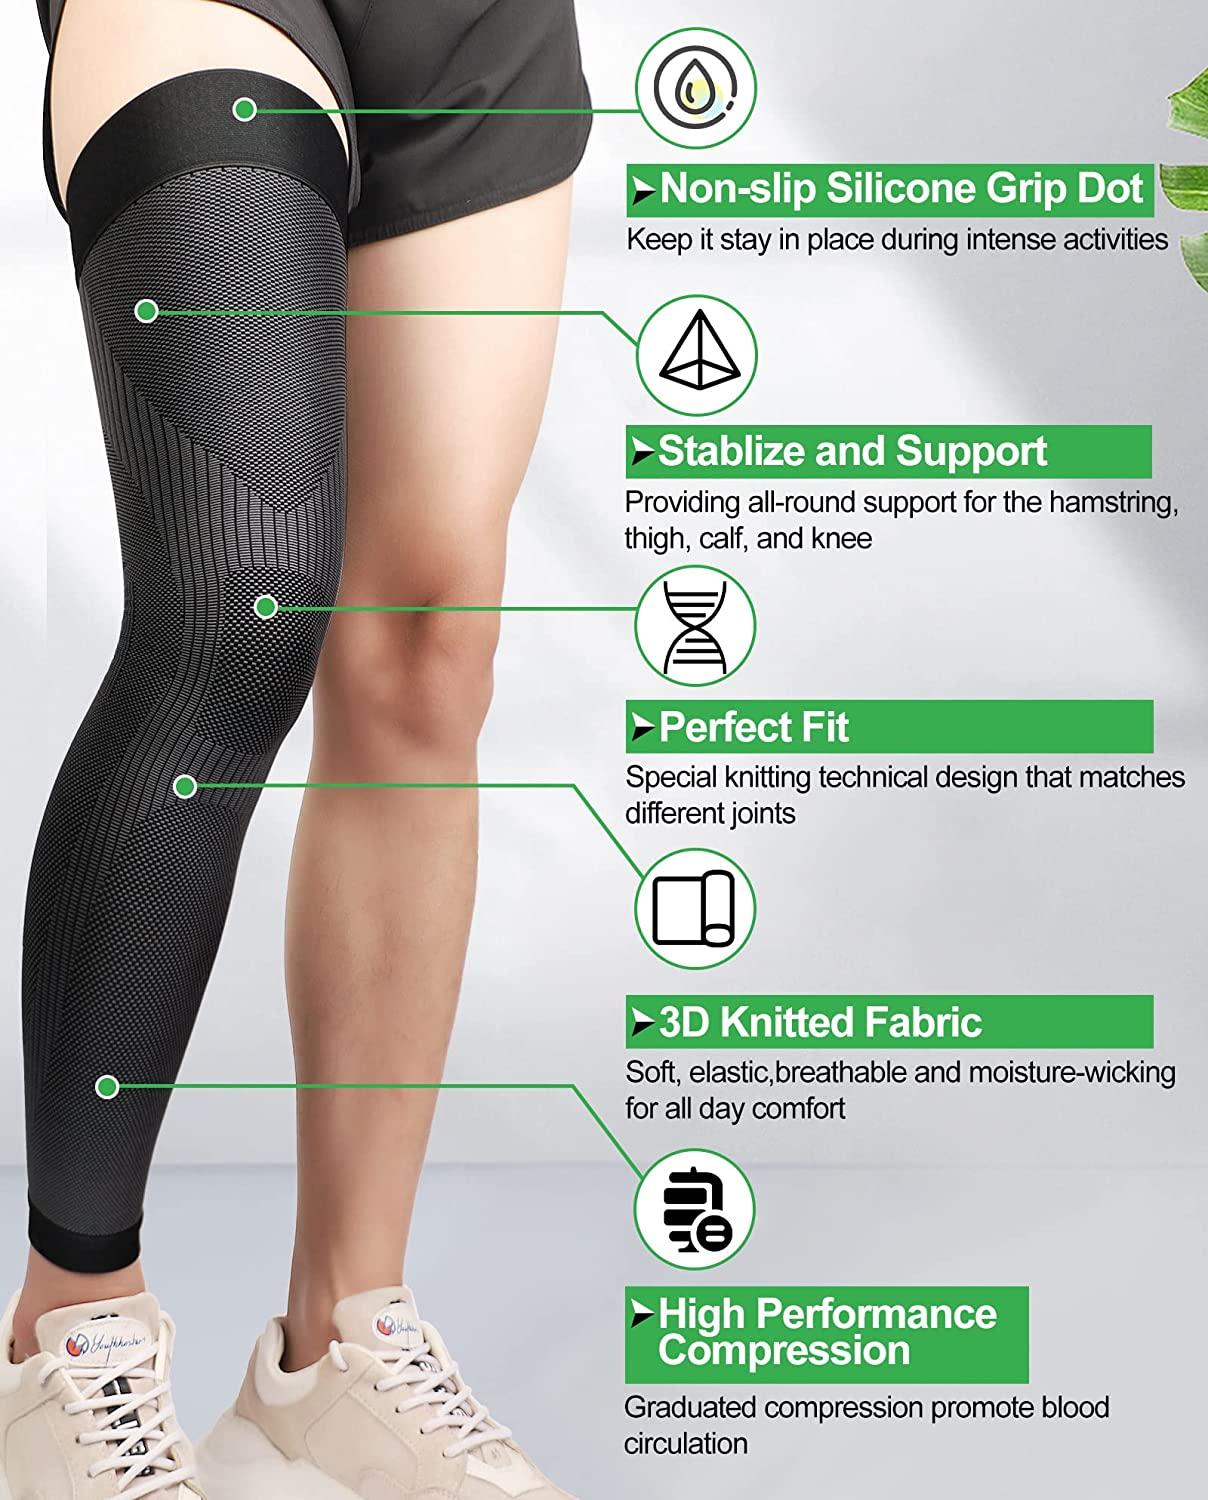 Full Leg Sleeves Long Compression Leg Sleeve Knee Sleeves Protect Leg, for  Man Women Basketball, Arthritis Cycling Sport Football, Reduce Varicose  Veins and Swelling of Legs(Lycra,Black,2XL,Pair) price in Egypt,   Egypt